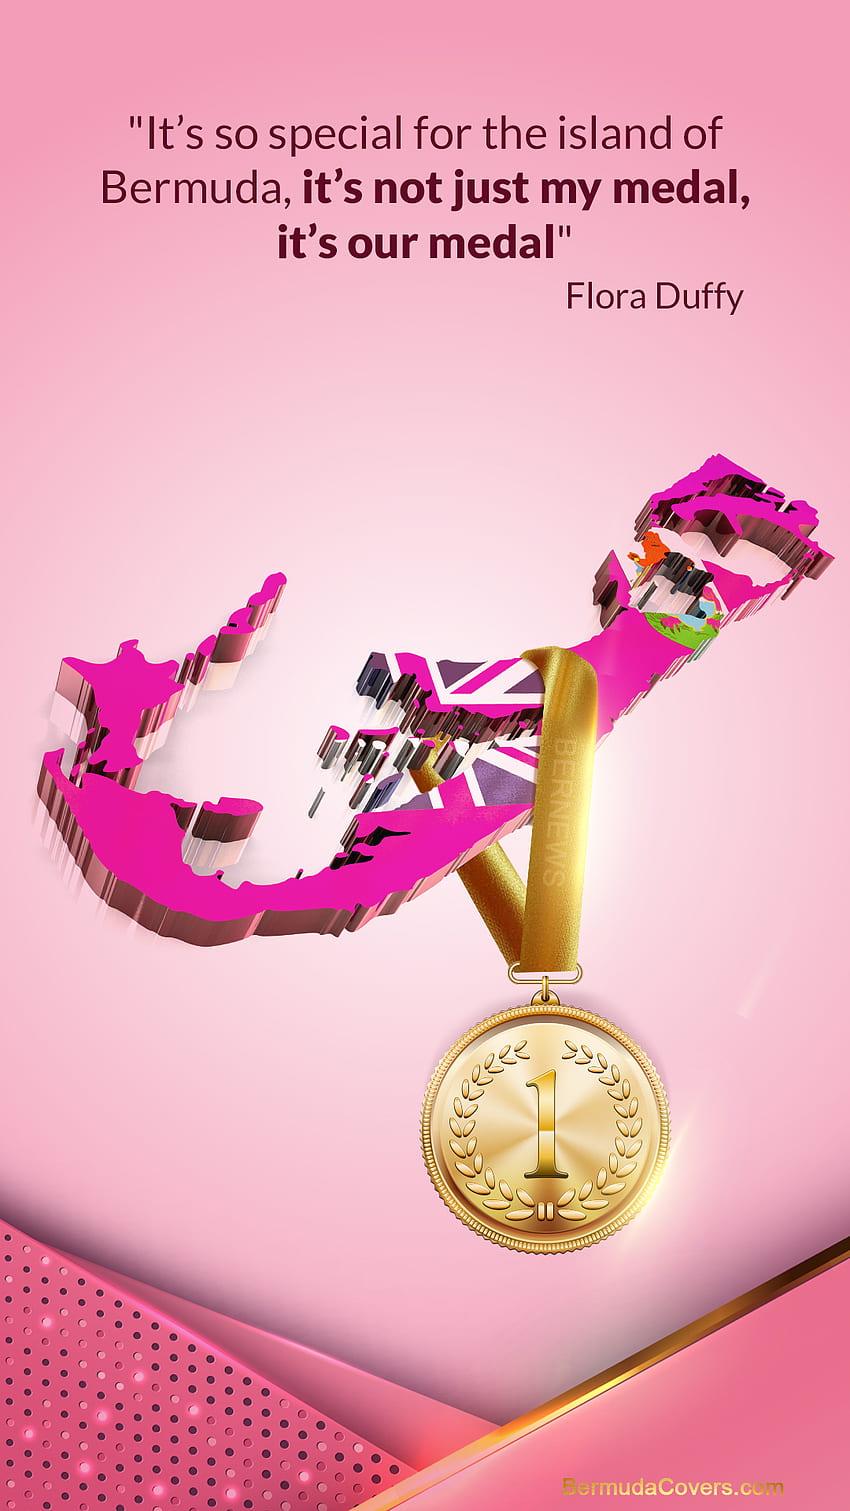 Wednesday: 'It's Our Olympic Medal', Gold Medal HD phone wallpaper